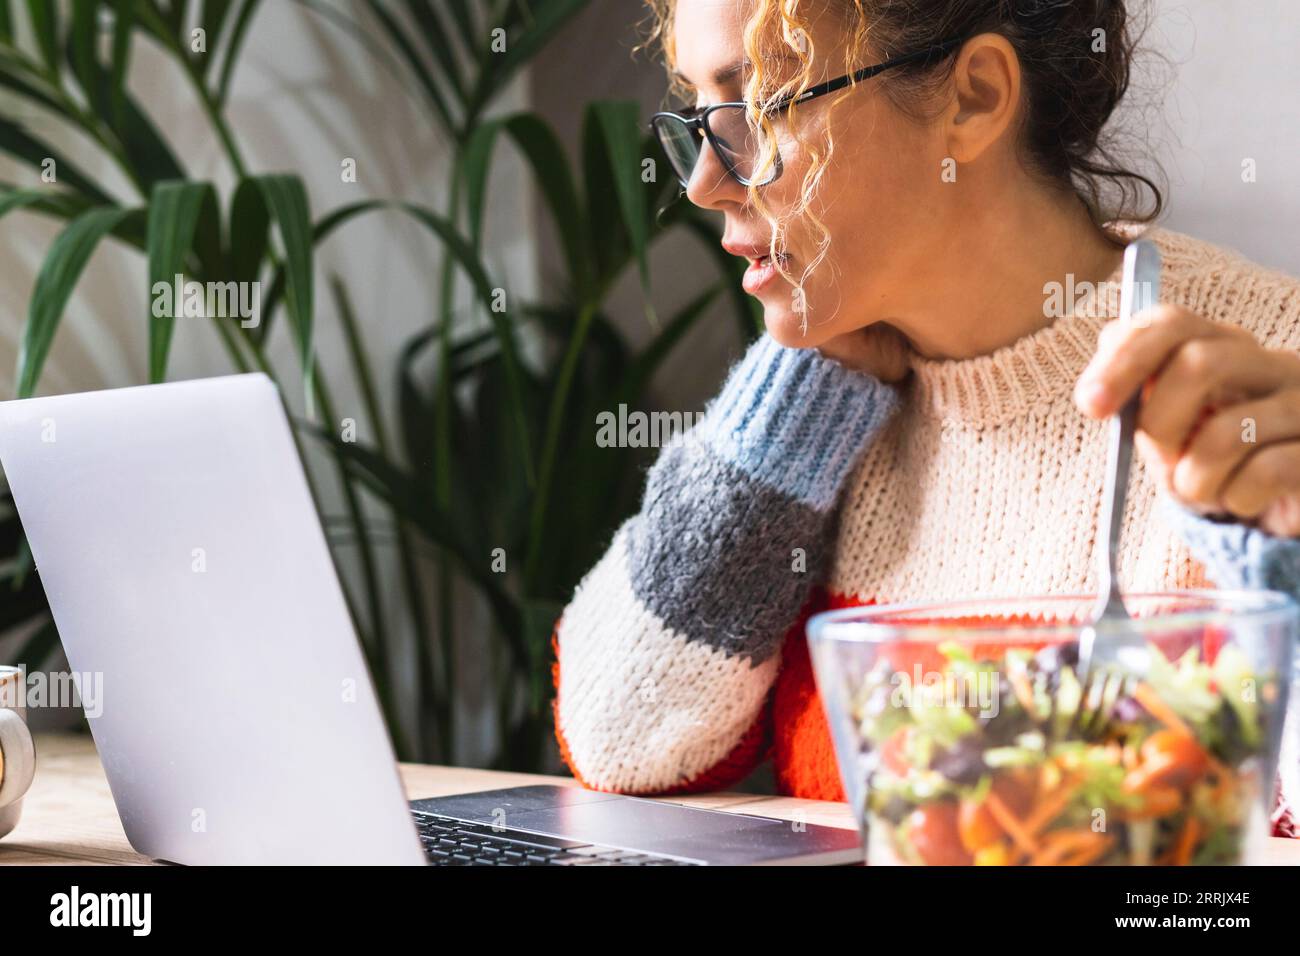 Female employee working on laptop while eating a salads from glass bowl. Concept of professional freelance lifestyle and healthy nutrition. Lunch break and job business. woman in smart working indoor Stock Photo